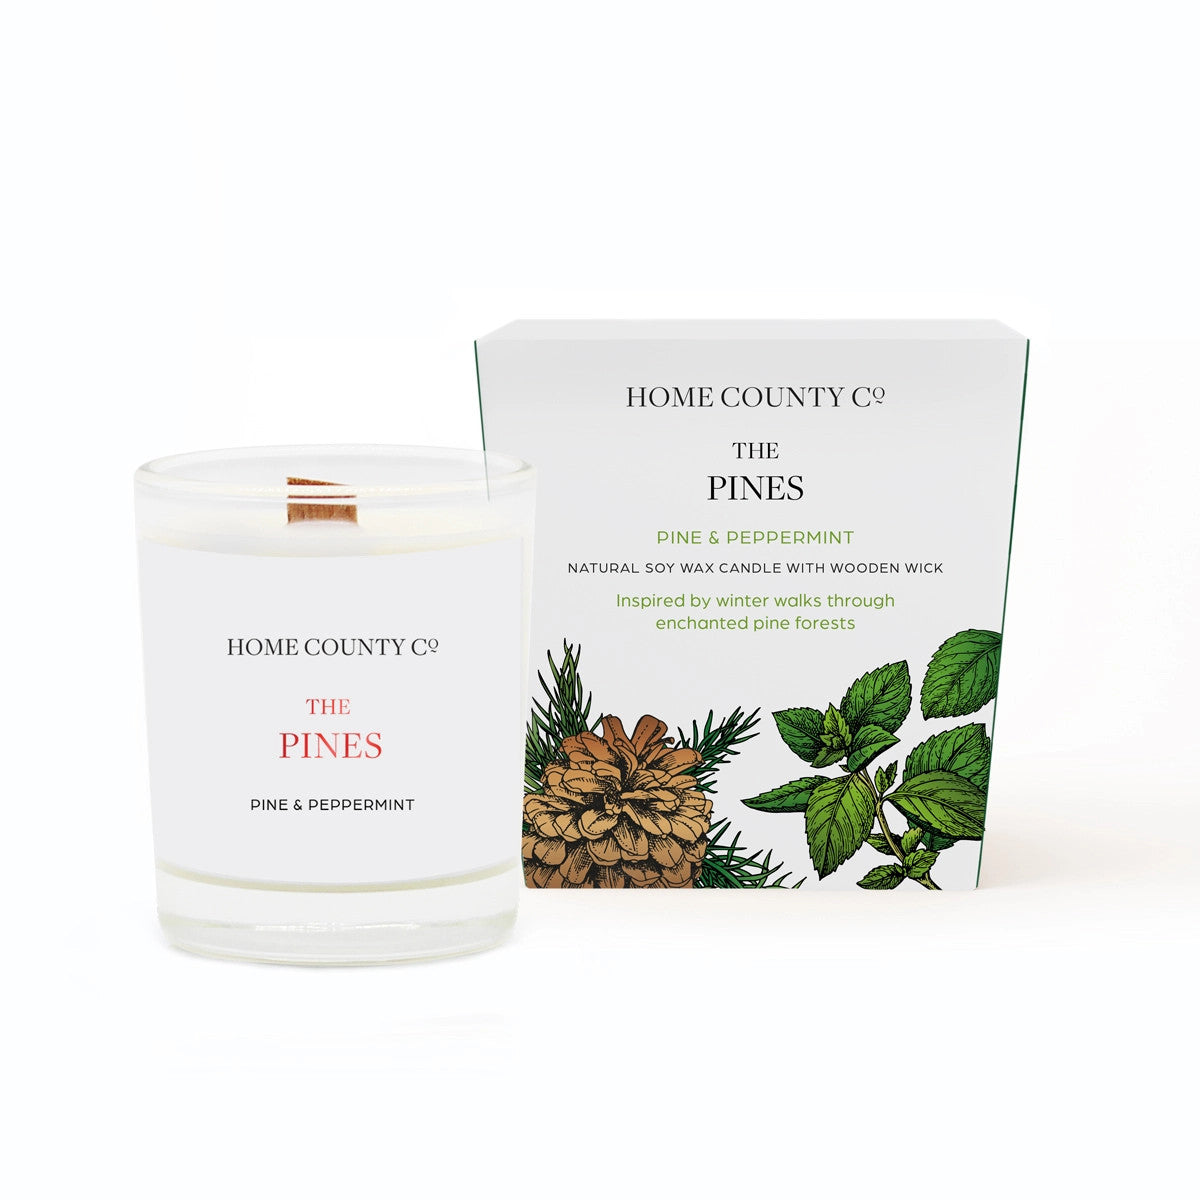 The Pines - Pine & Peppermint Soy Votive Candle by Home County Candles